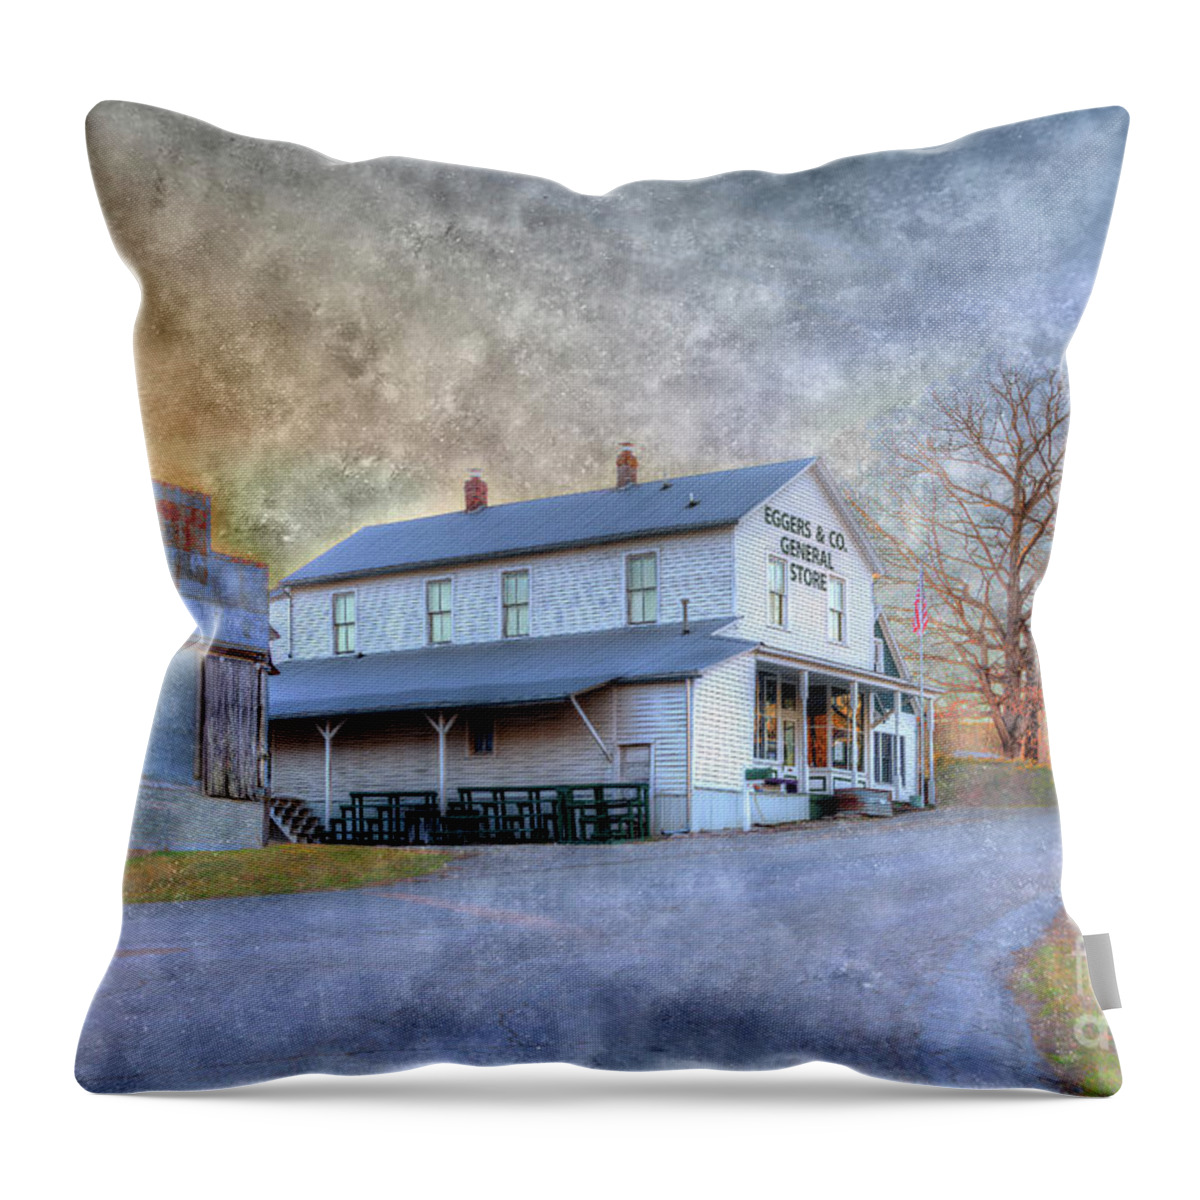 General Store Throw Pillow featuring the photograph Eggers and Company General Store by Larry Braun